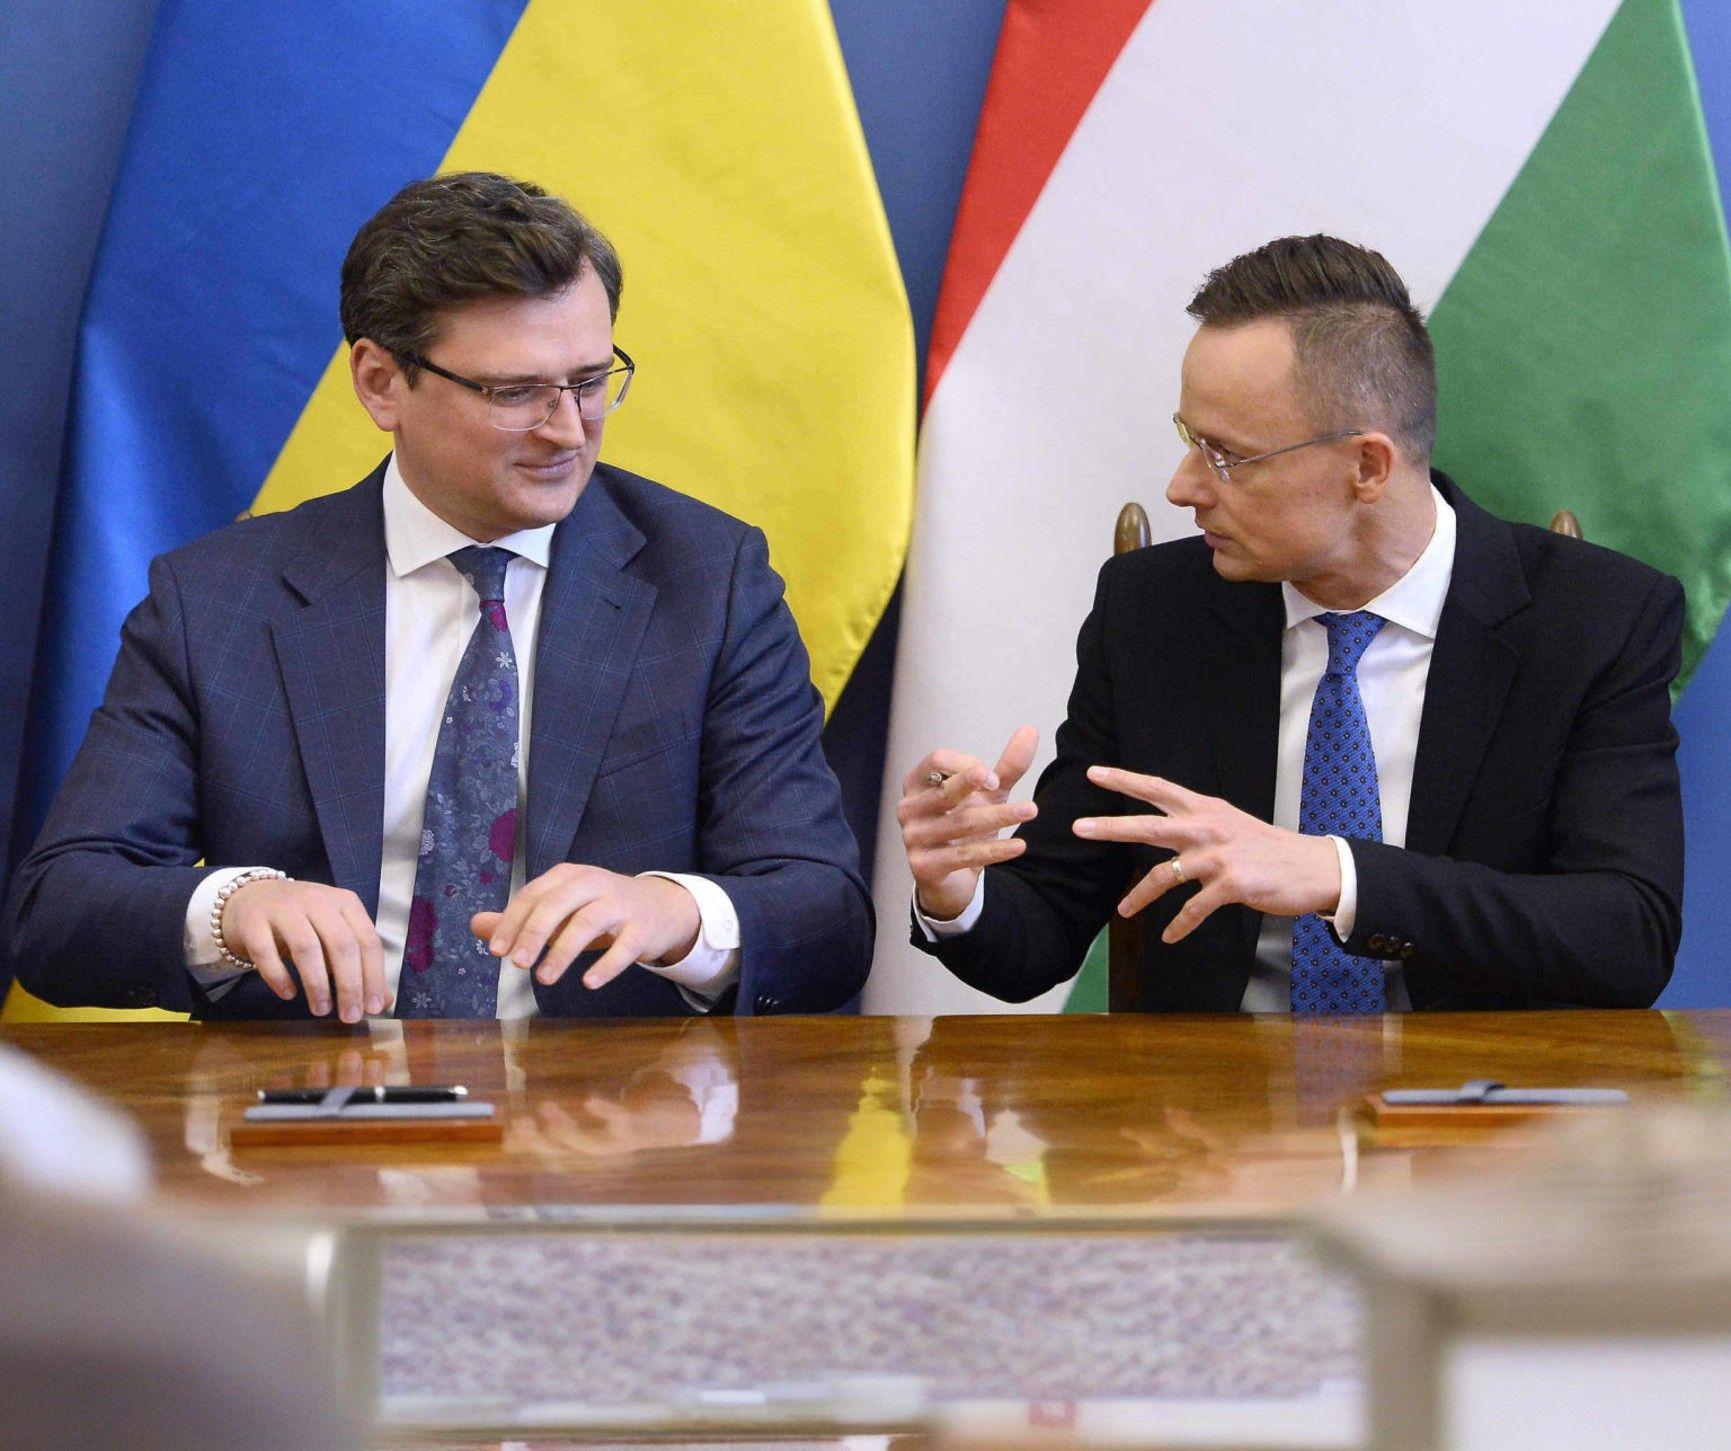 Hungary faces criticism over calls for talks on Ukraine